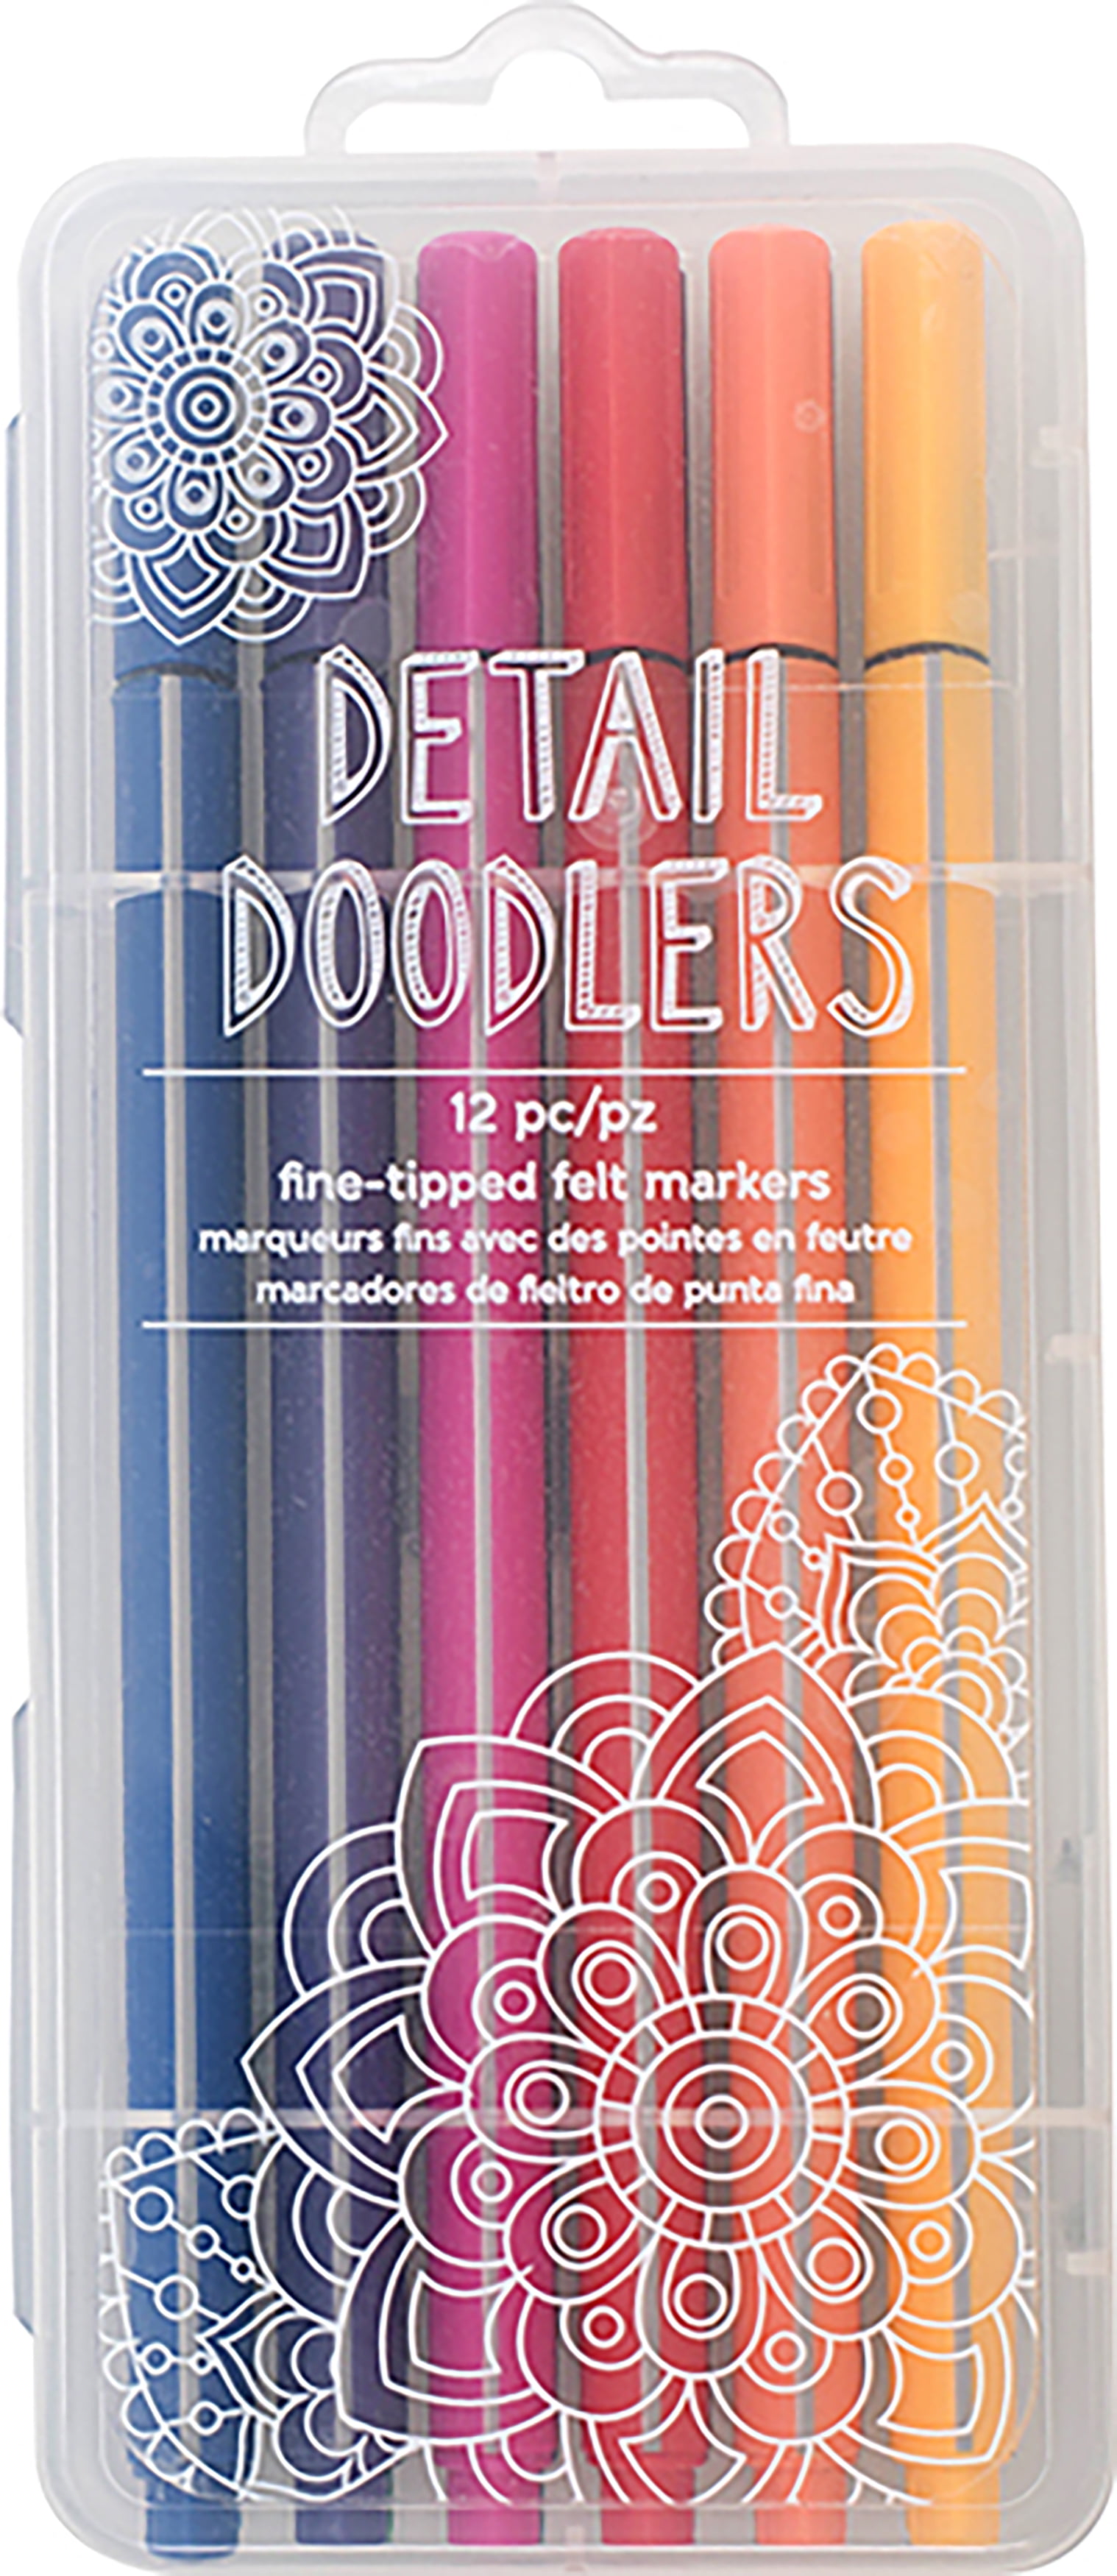 Are these the most satisfying markers ever? 😍✍️ #doodles #doodling #d